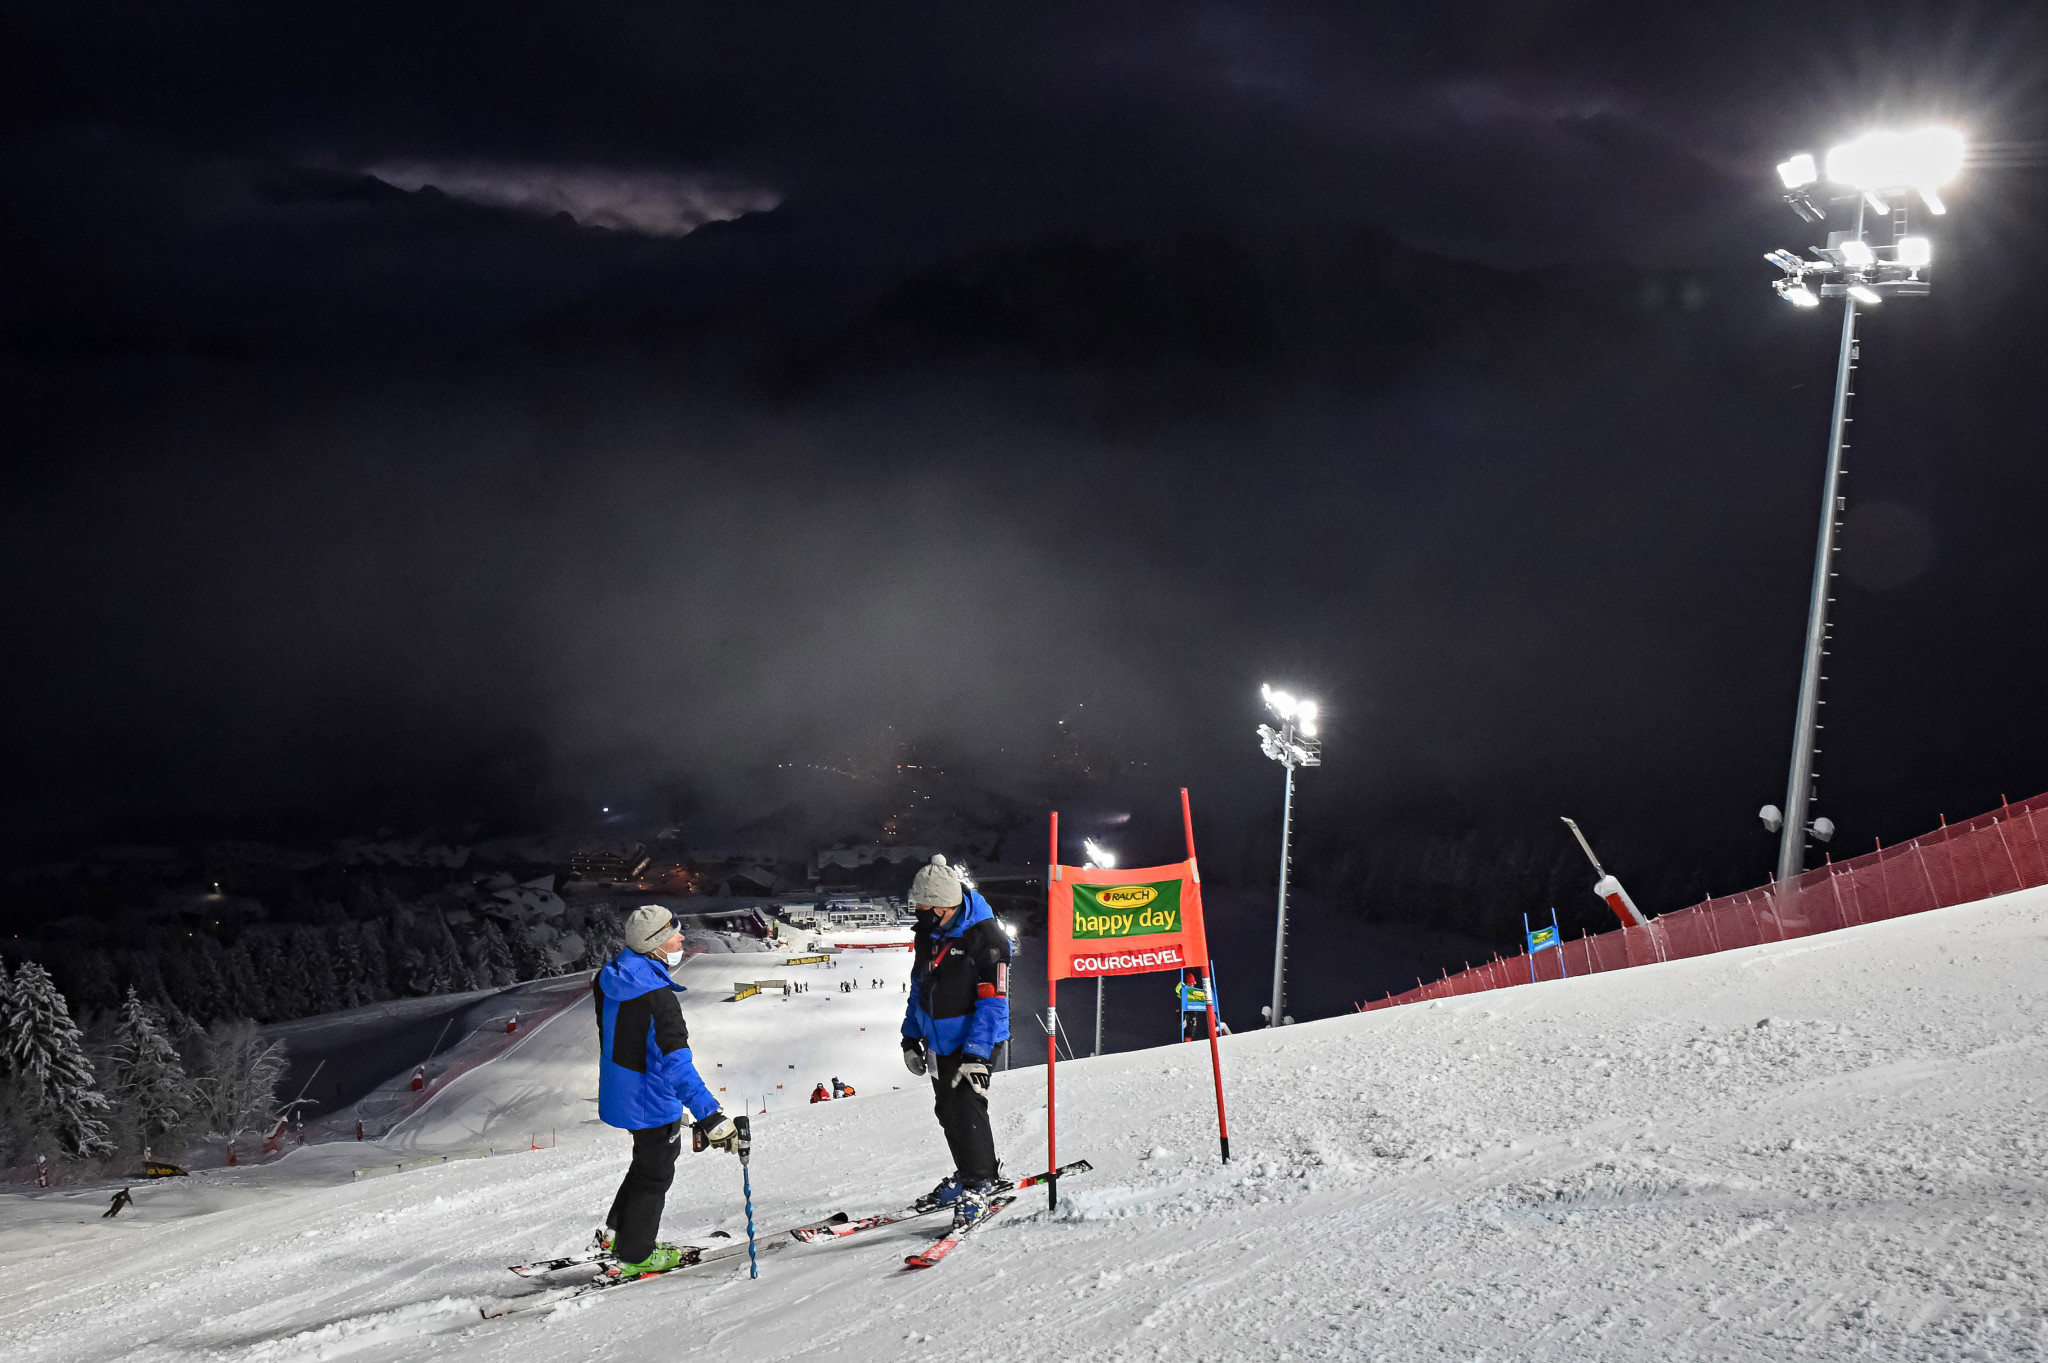 FIS Alpine Ski World Cup race in Courchevel postponed after heavy snowfall